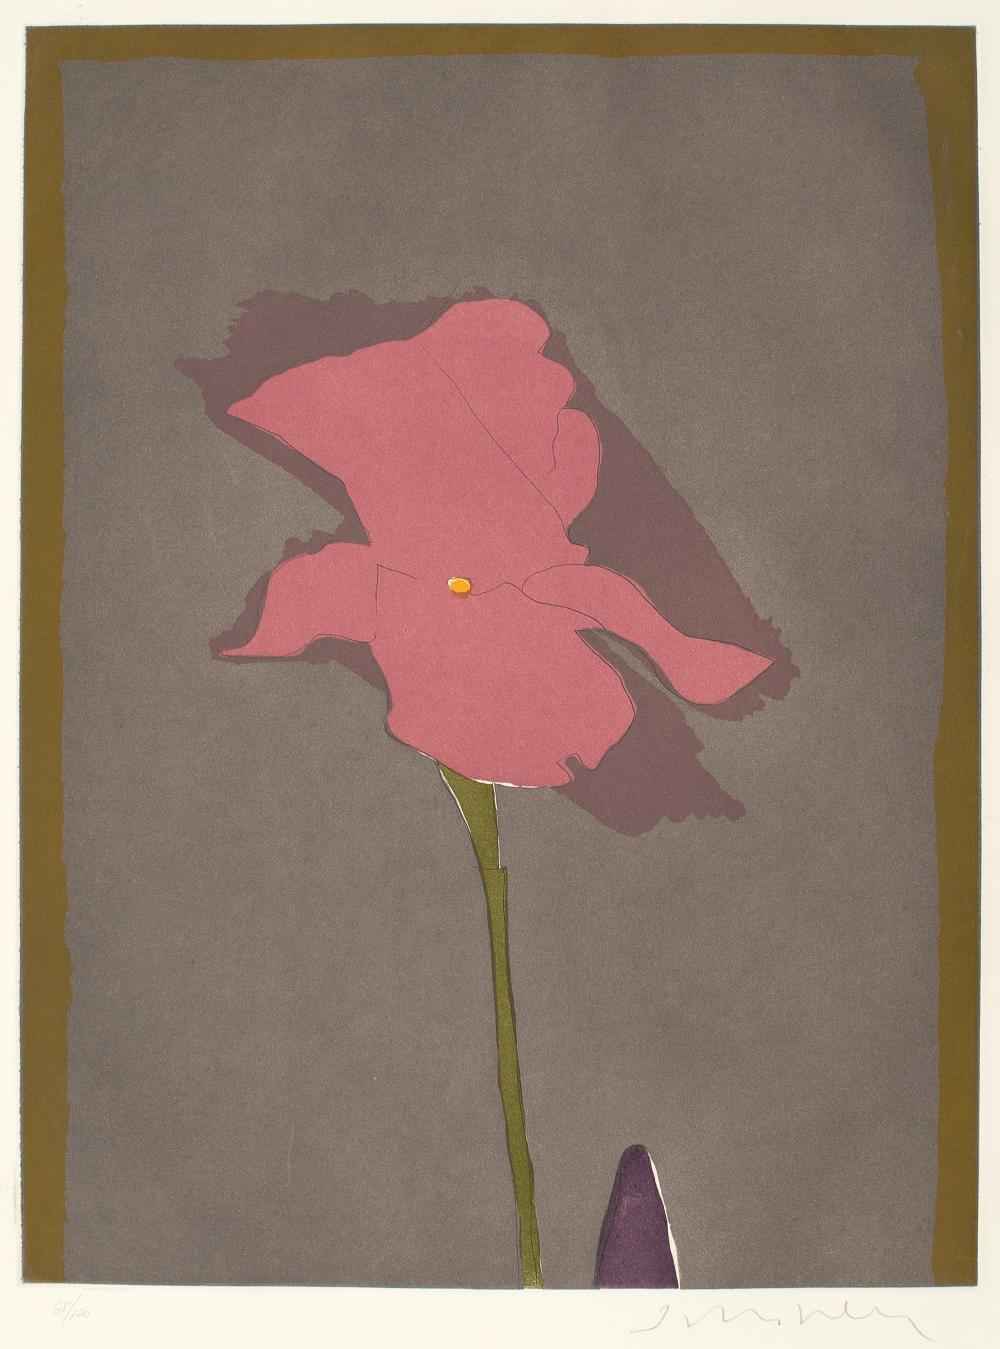 FRITZ SCHOLDER, FLOWER AT GIVERNY